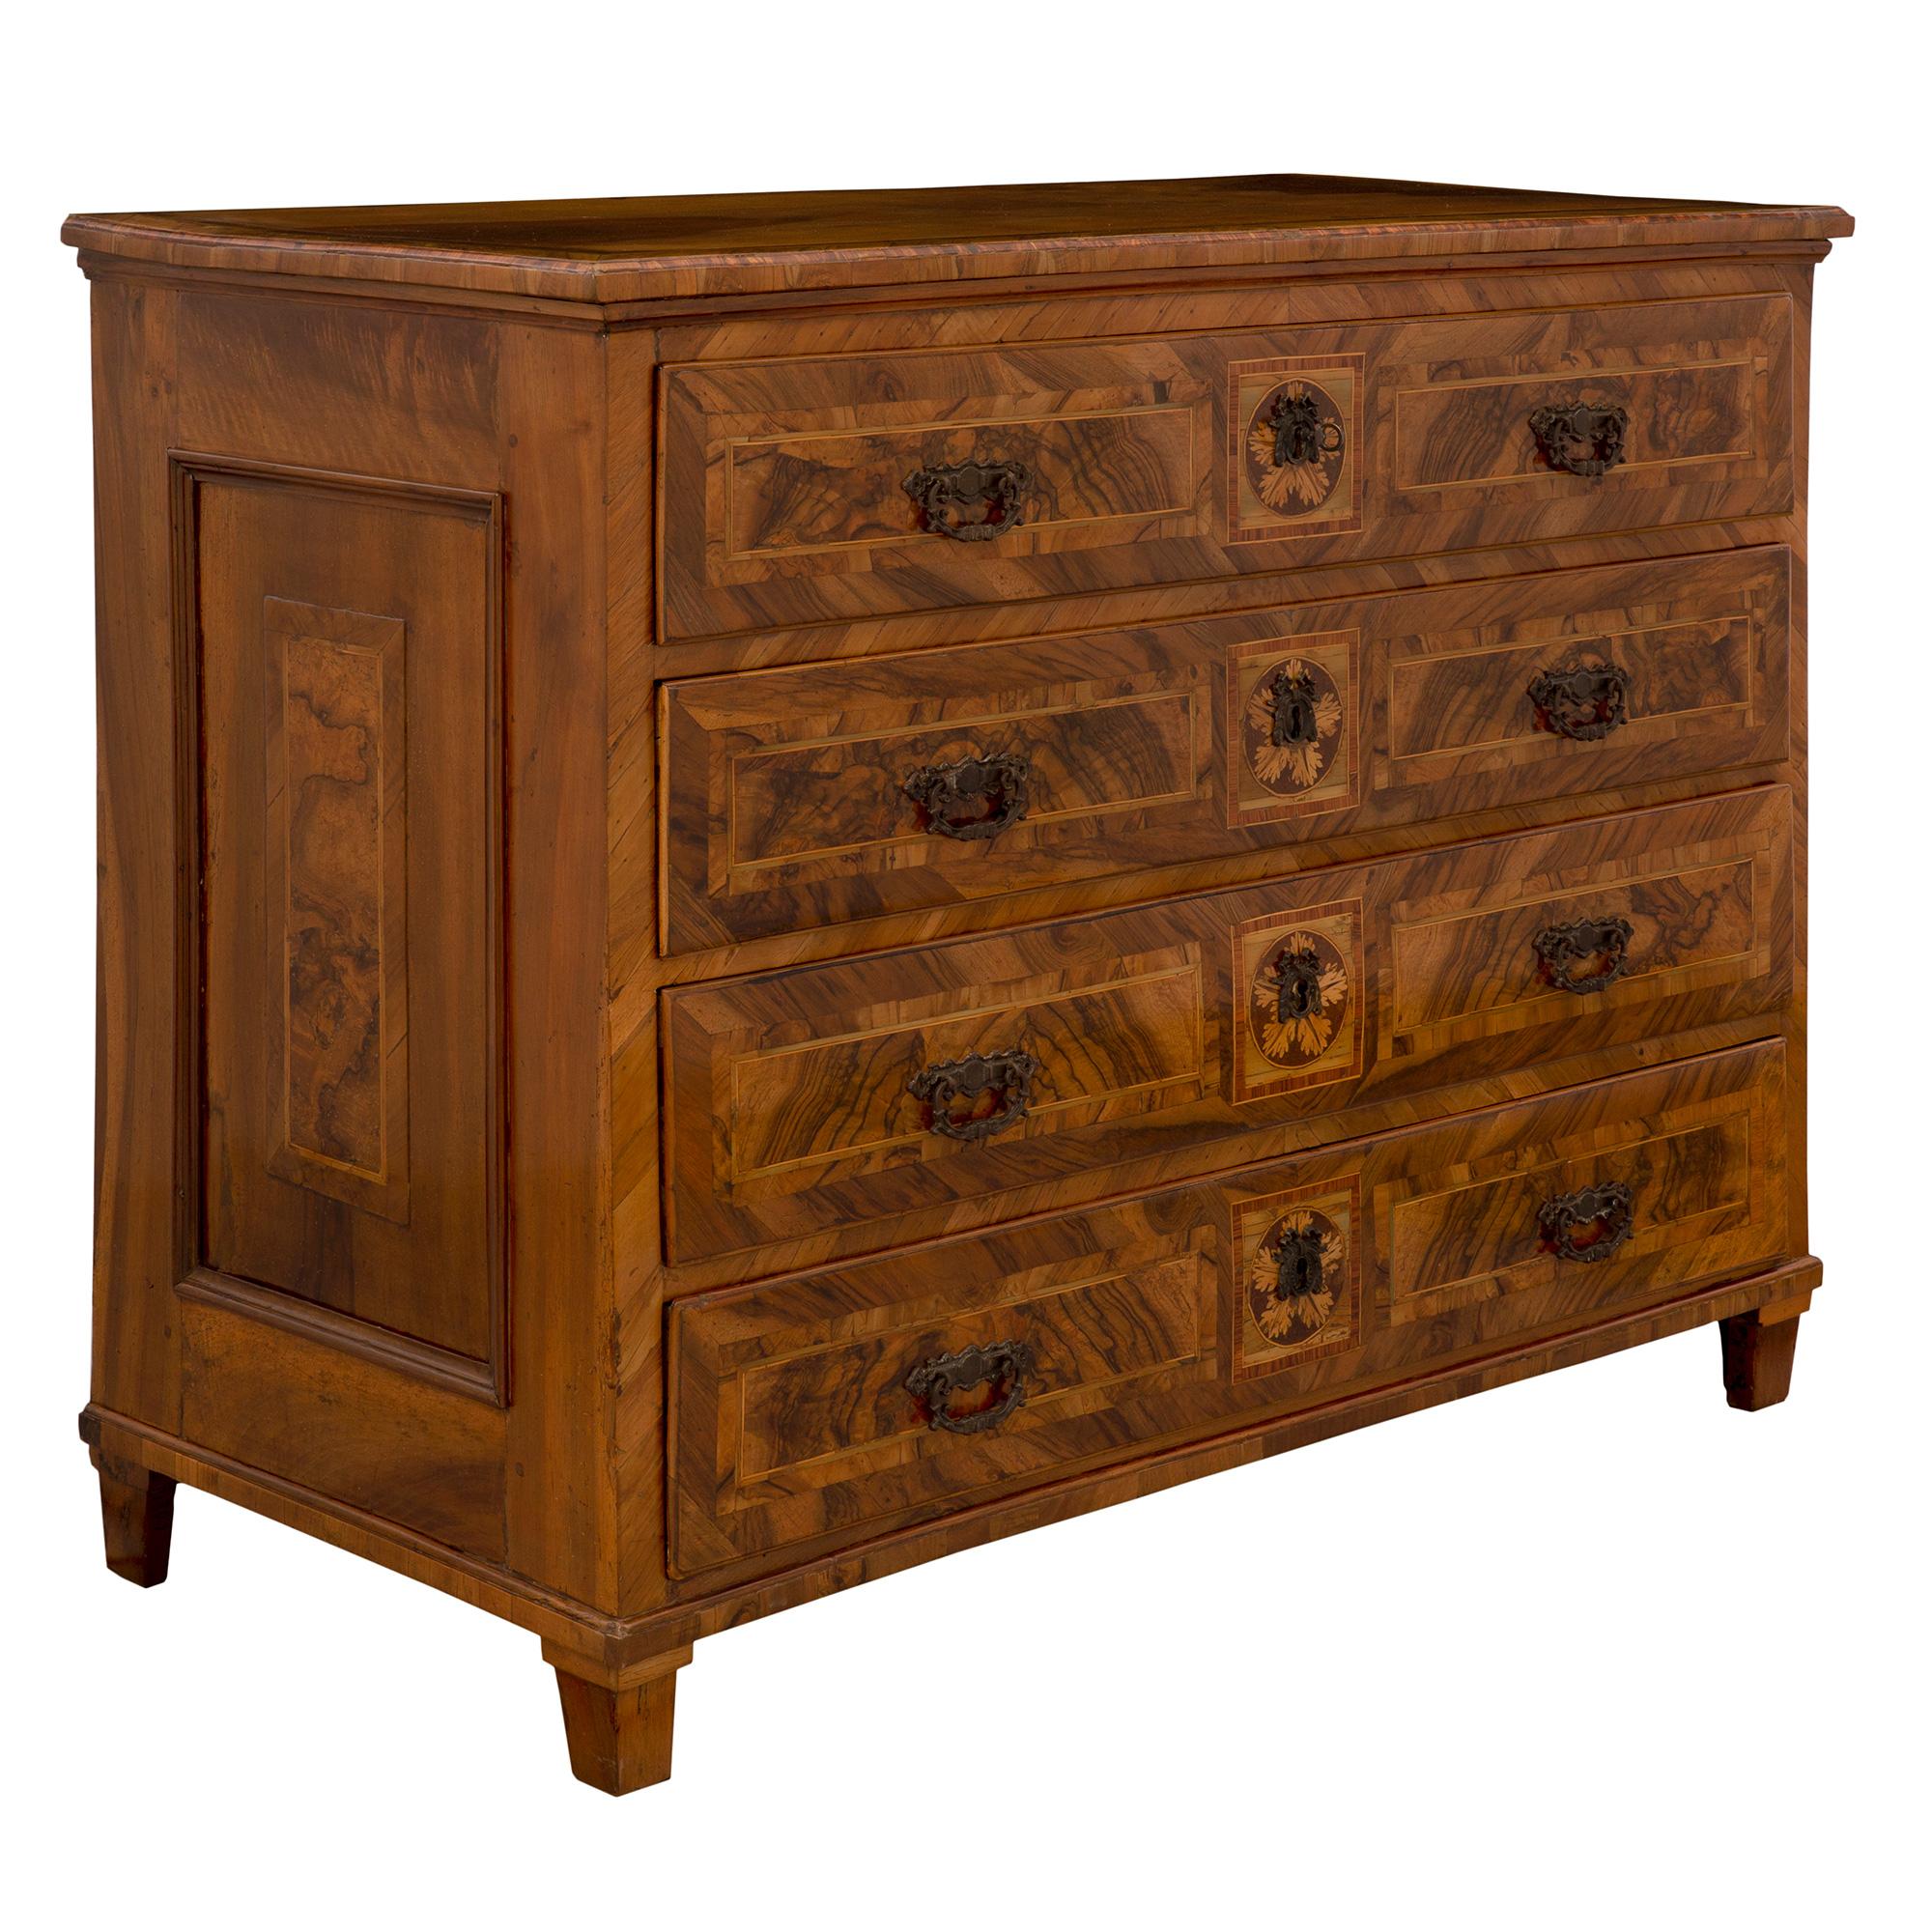 Italian 18th Century Louis XVI Period Walnut, Kingwood and Charmwood Commode In Good Condition For Sale In West Palm Beach, FL